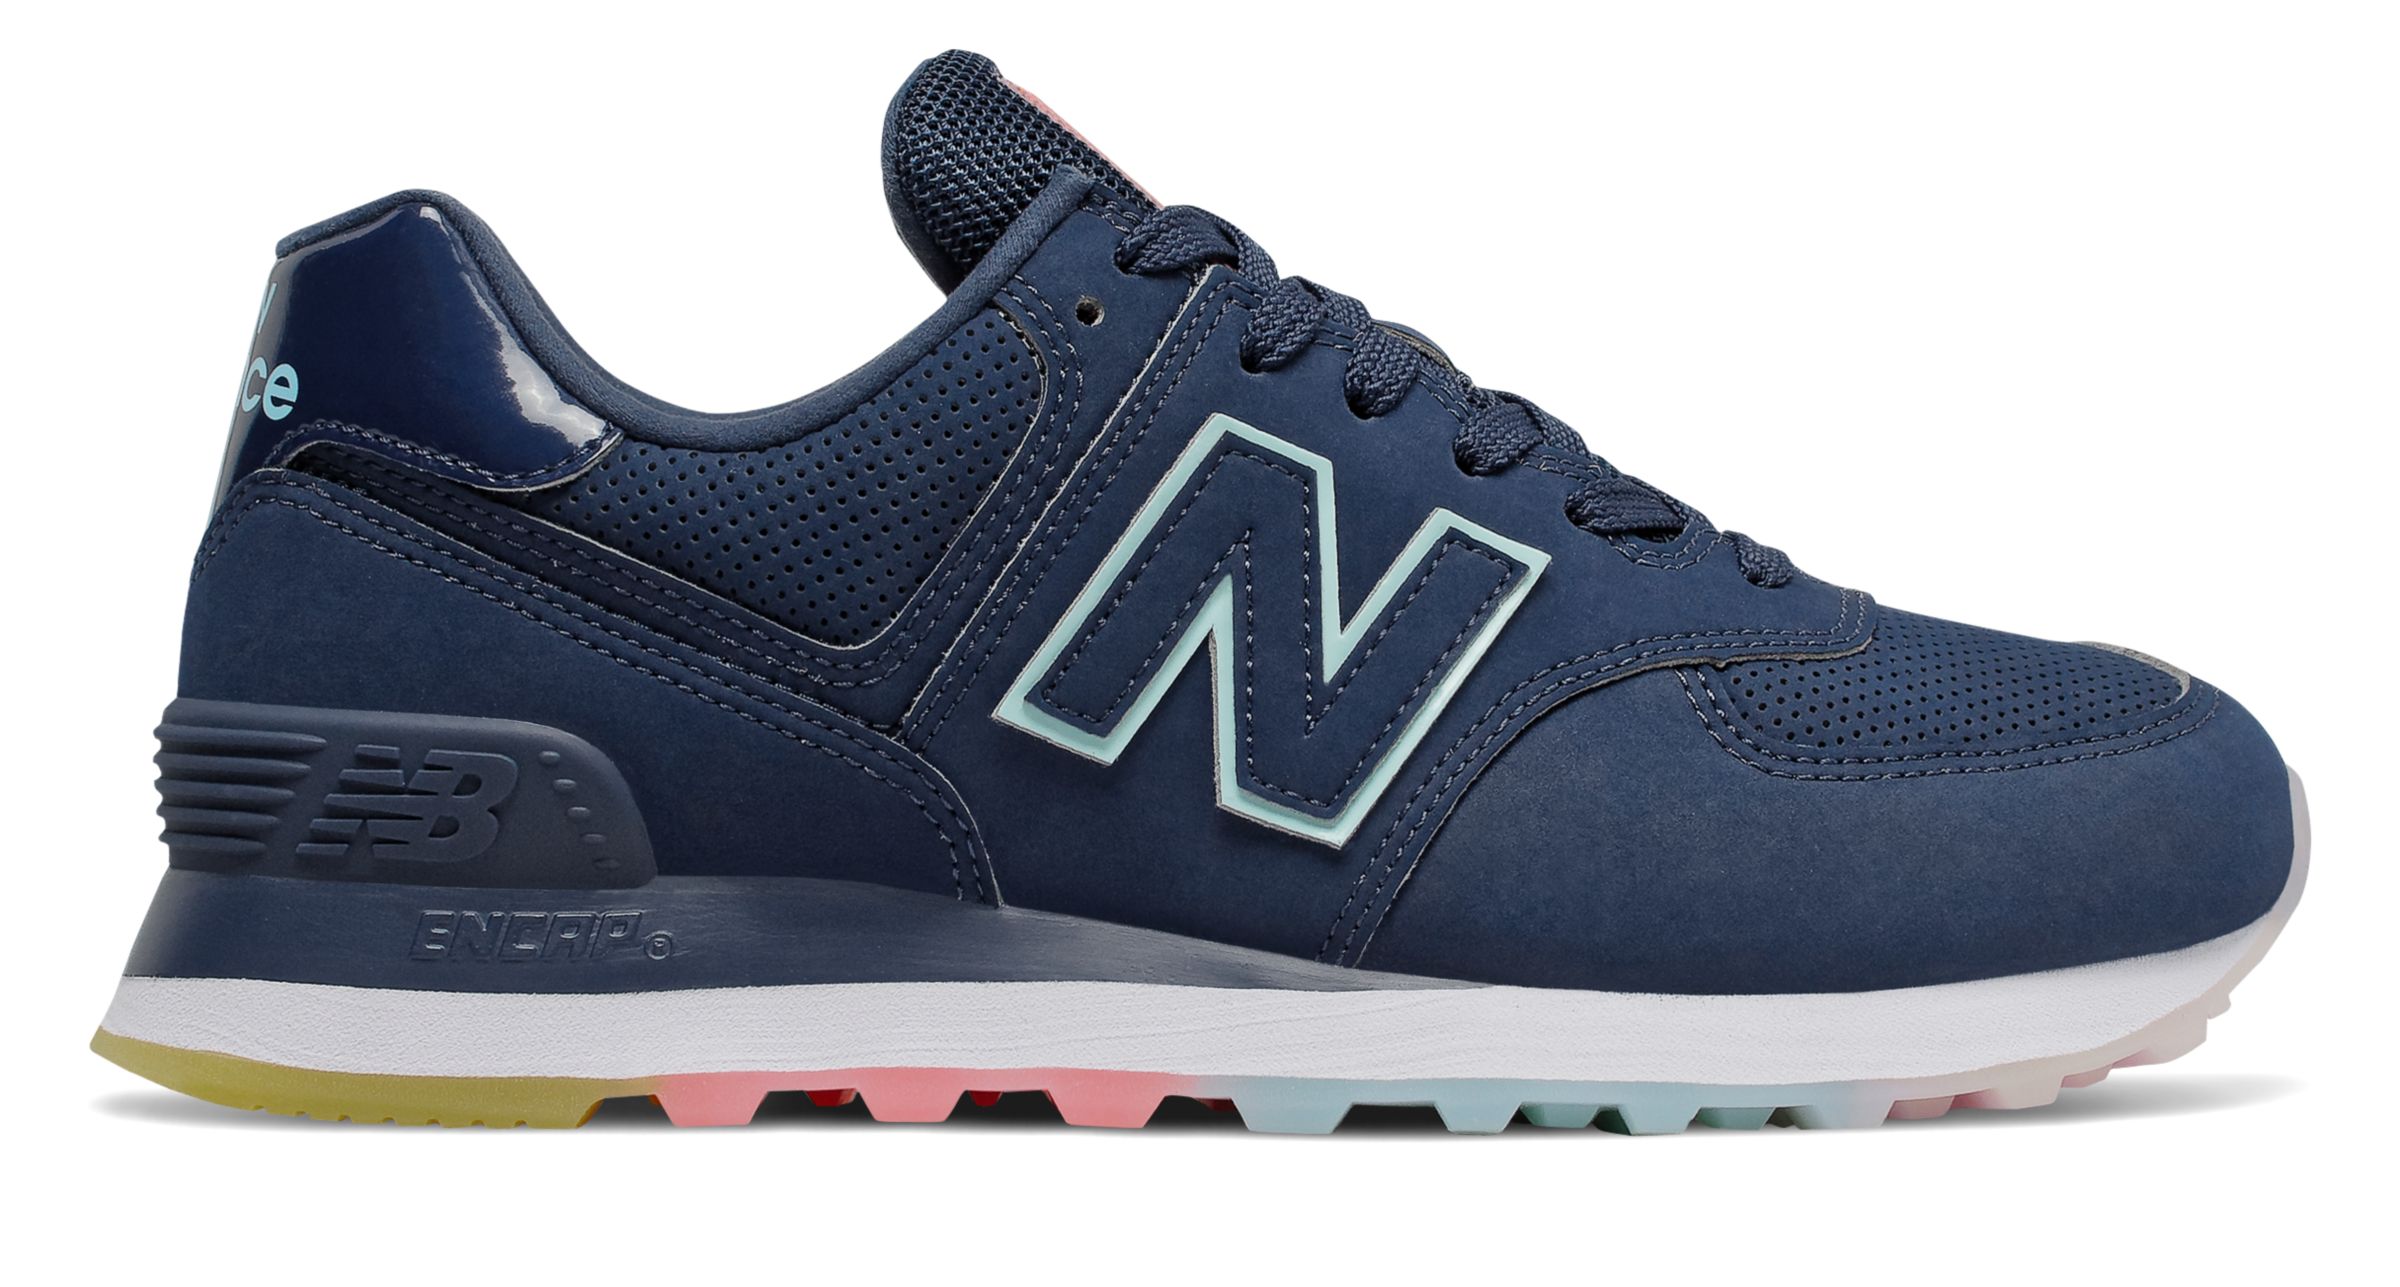 New Balance Women's 574 Shoes Navy with Blue eBay